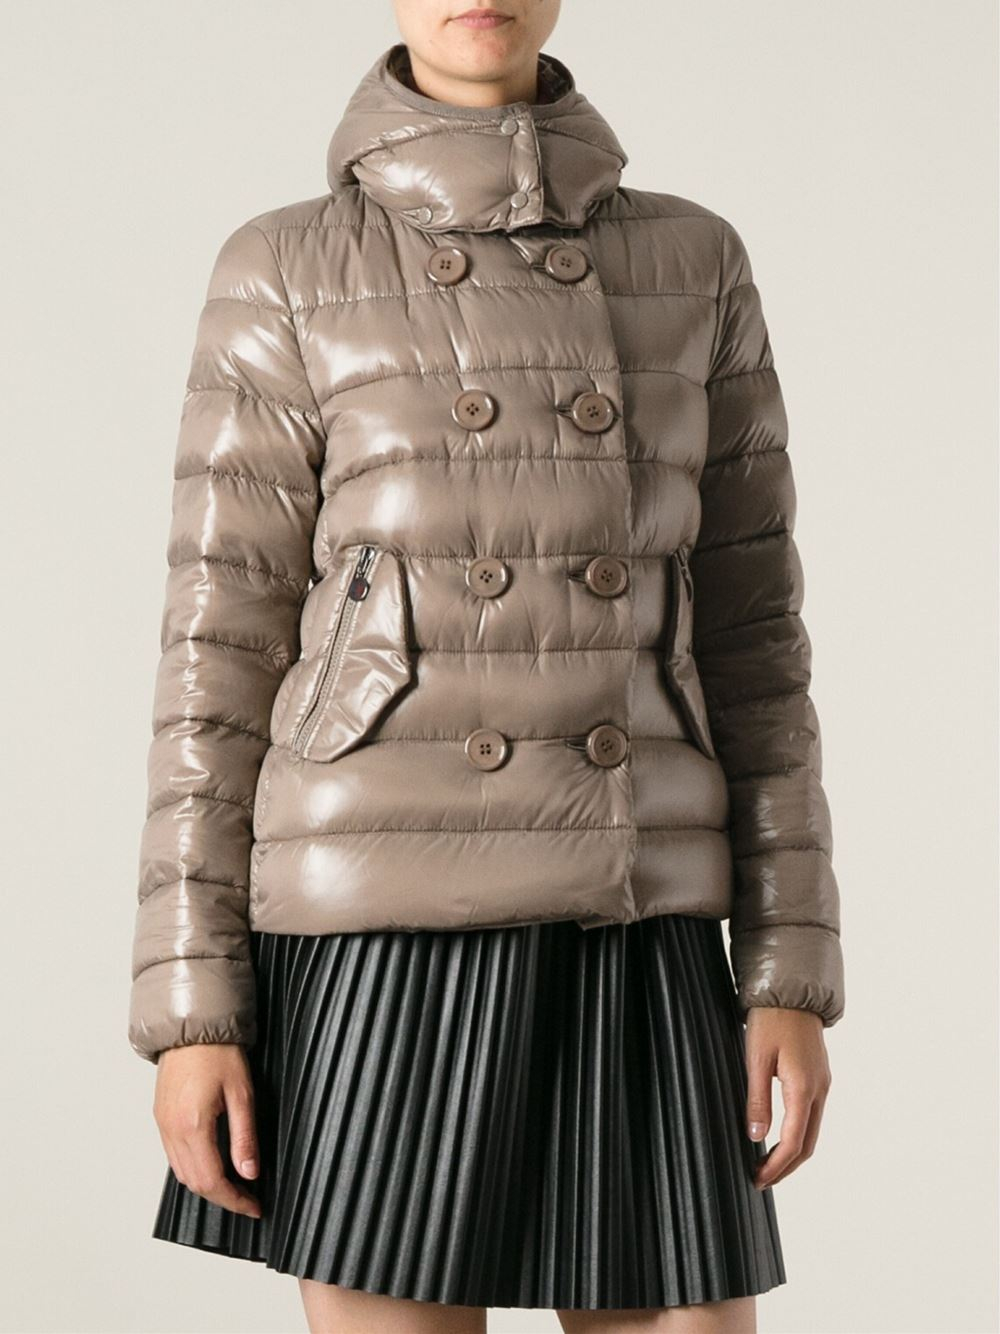 Lyst - Moncler Plane Padded Jacket in Gray